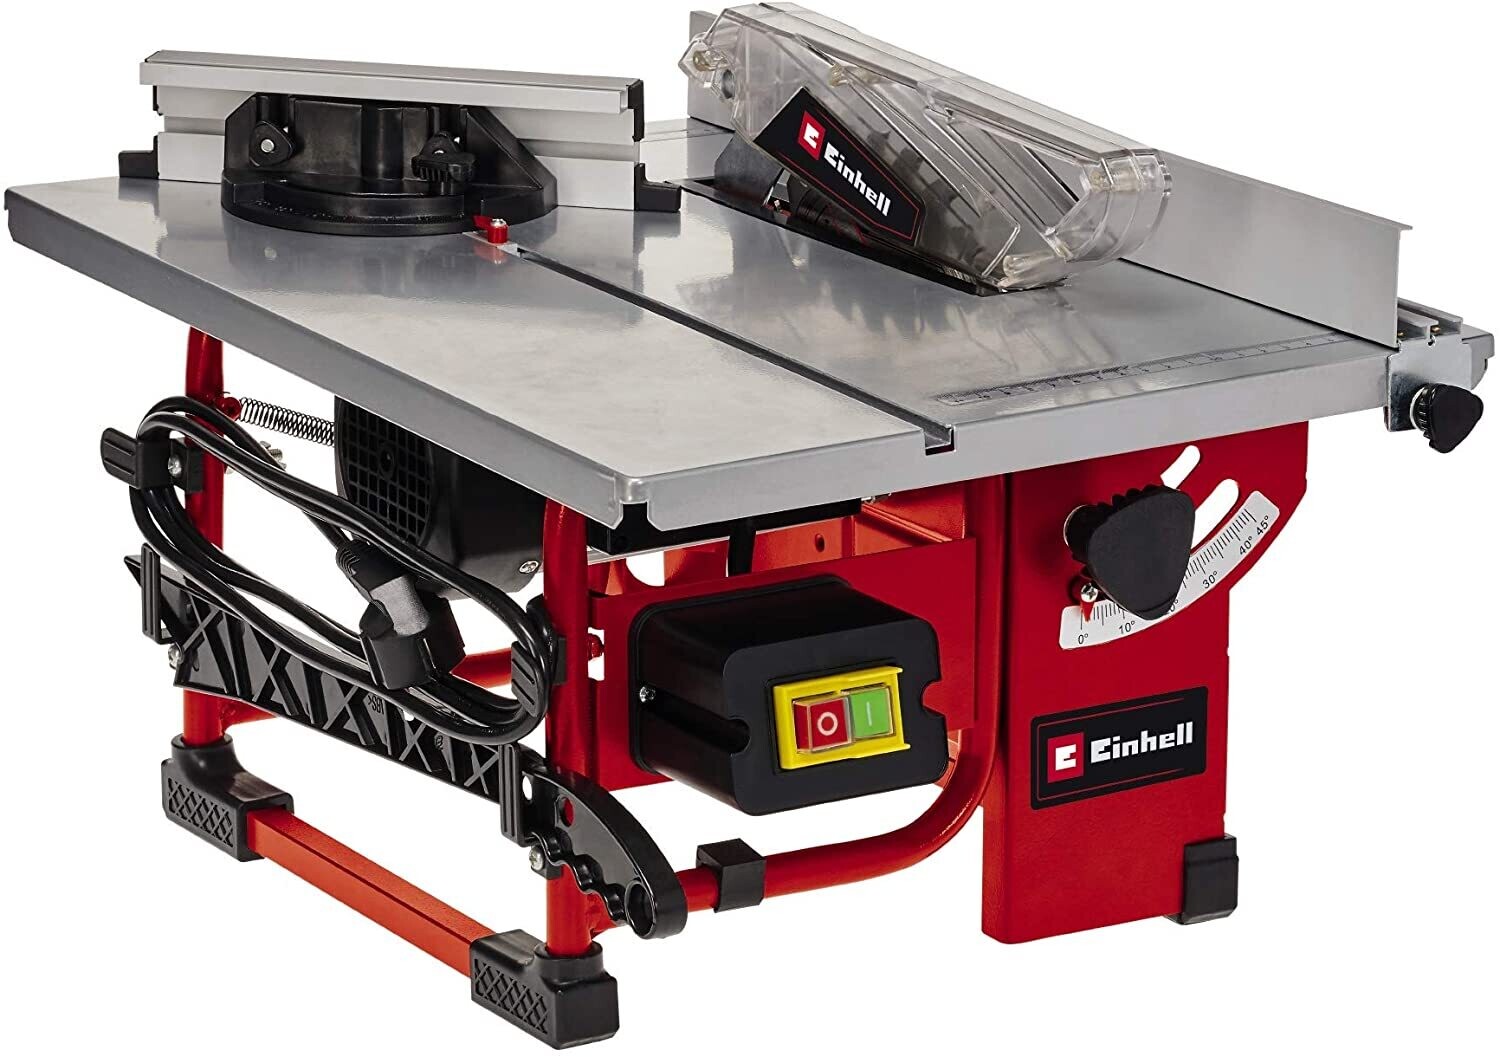 Powerful, Compact, and Portable Circular Bench Saw For Woodworking